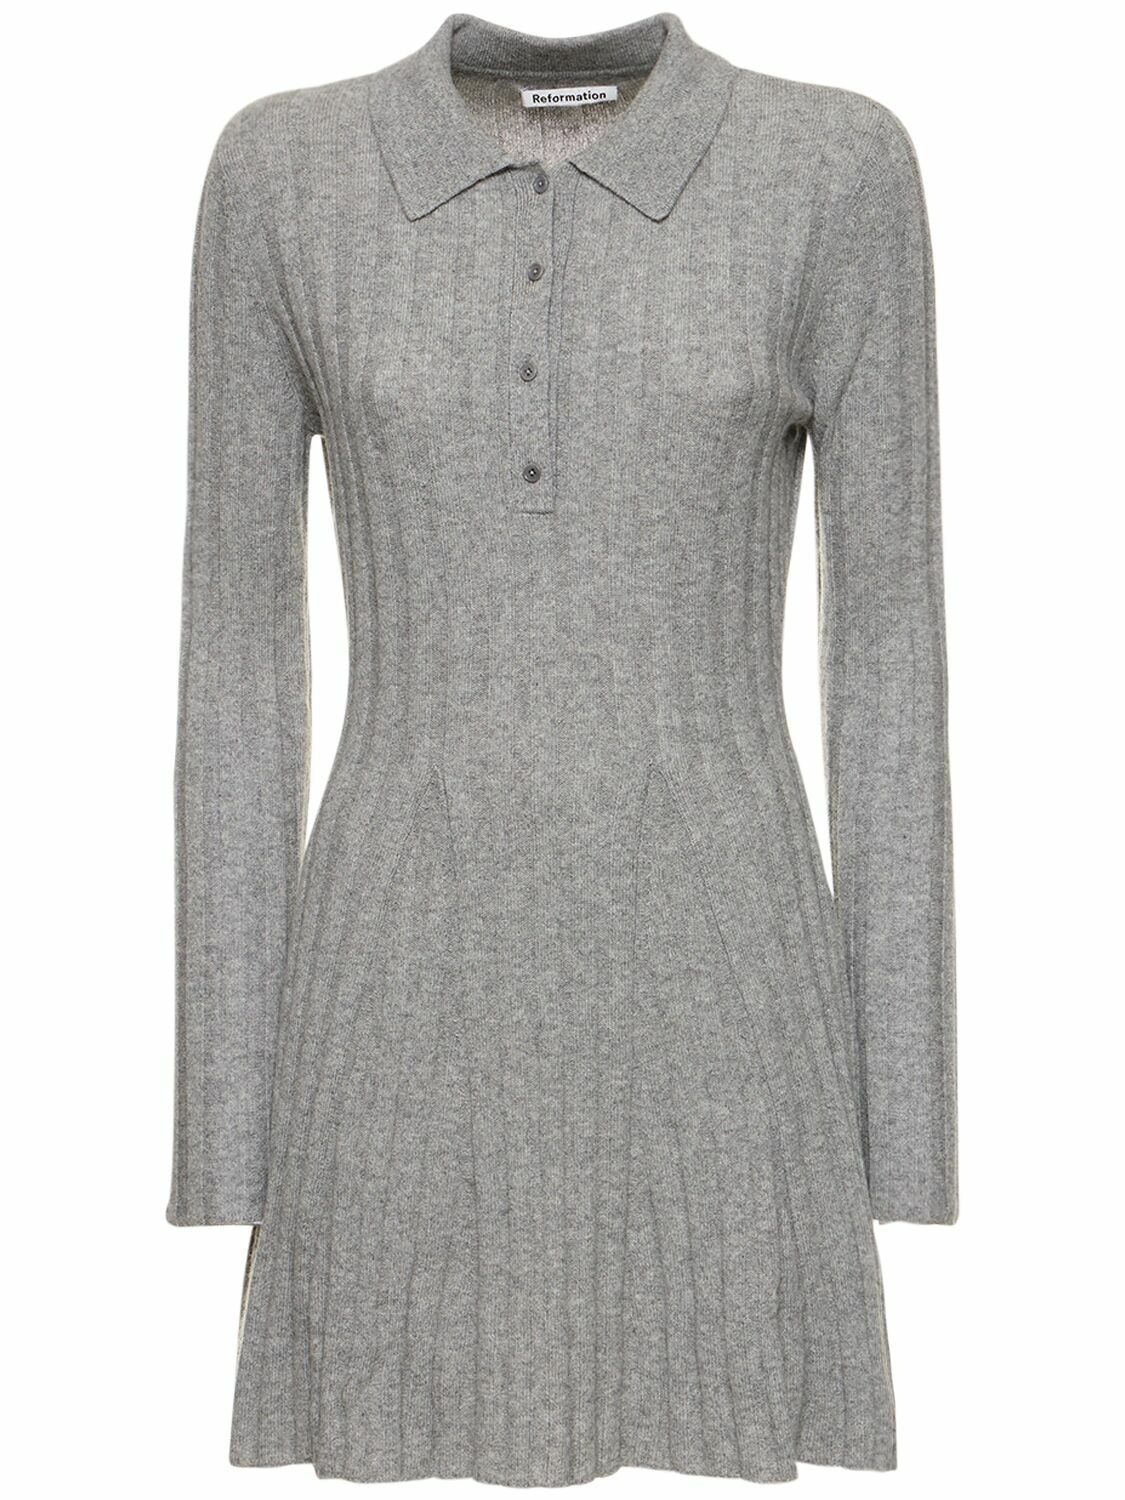 Photo: REFORMATION - Walsh Collared Cashmere Mini Dress